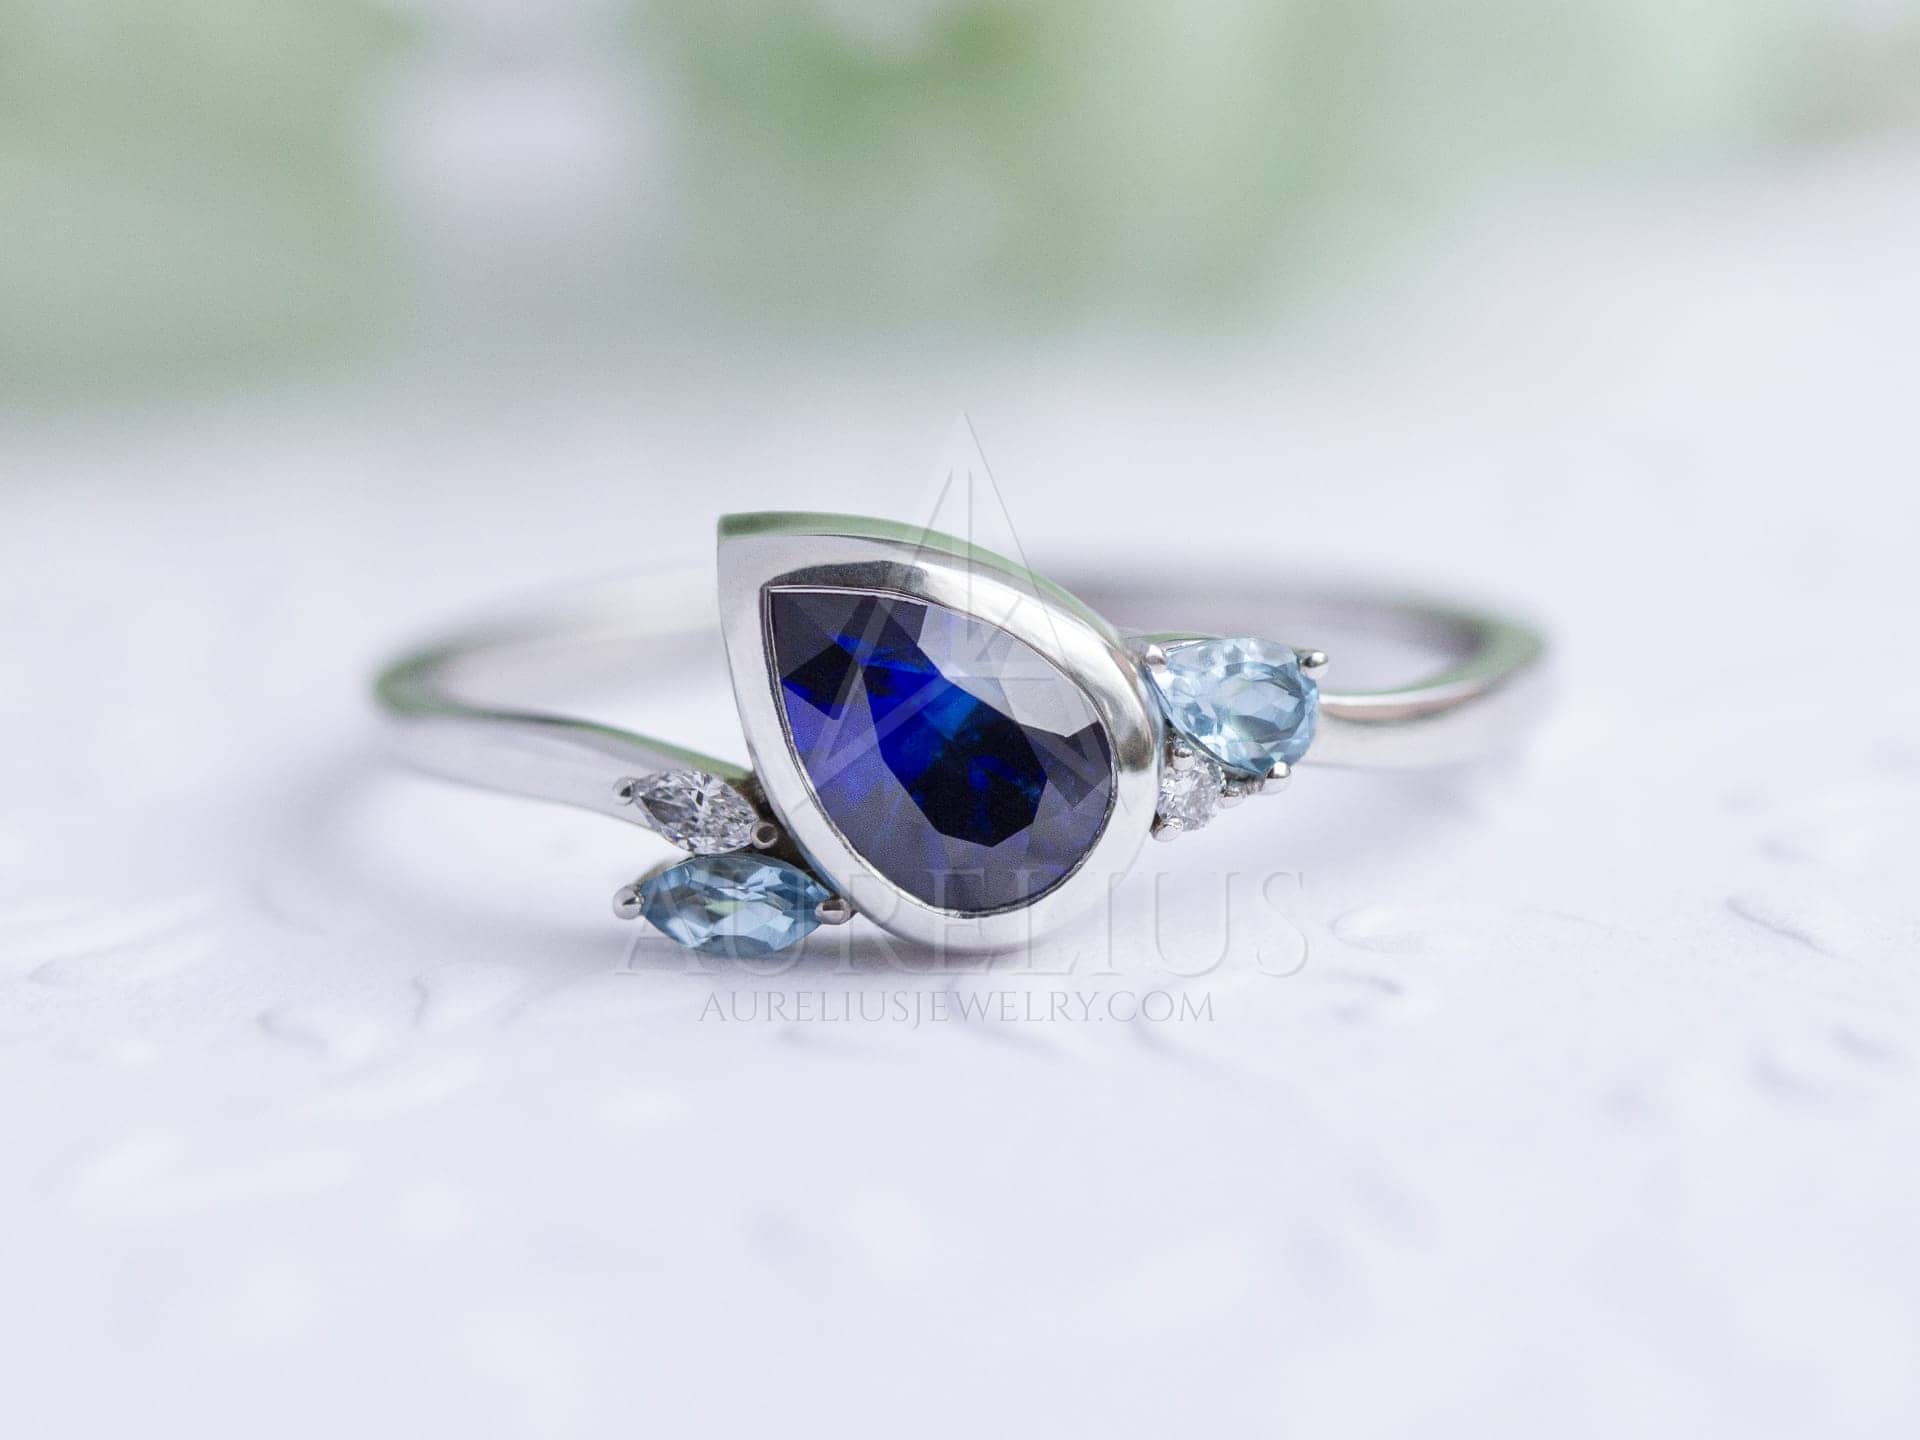 Buy Dainty Sapphire Ring// Sapphire Engagement Rings Sett// Vintage Oval  1.5CT Oval Blue Sapphire Bridal Set// Gemstone Birthstone Ring Set Gold  Online in India - Etsy